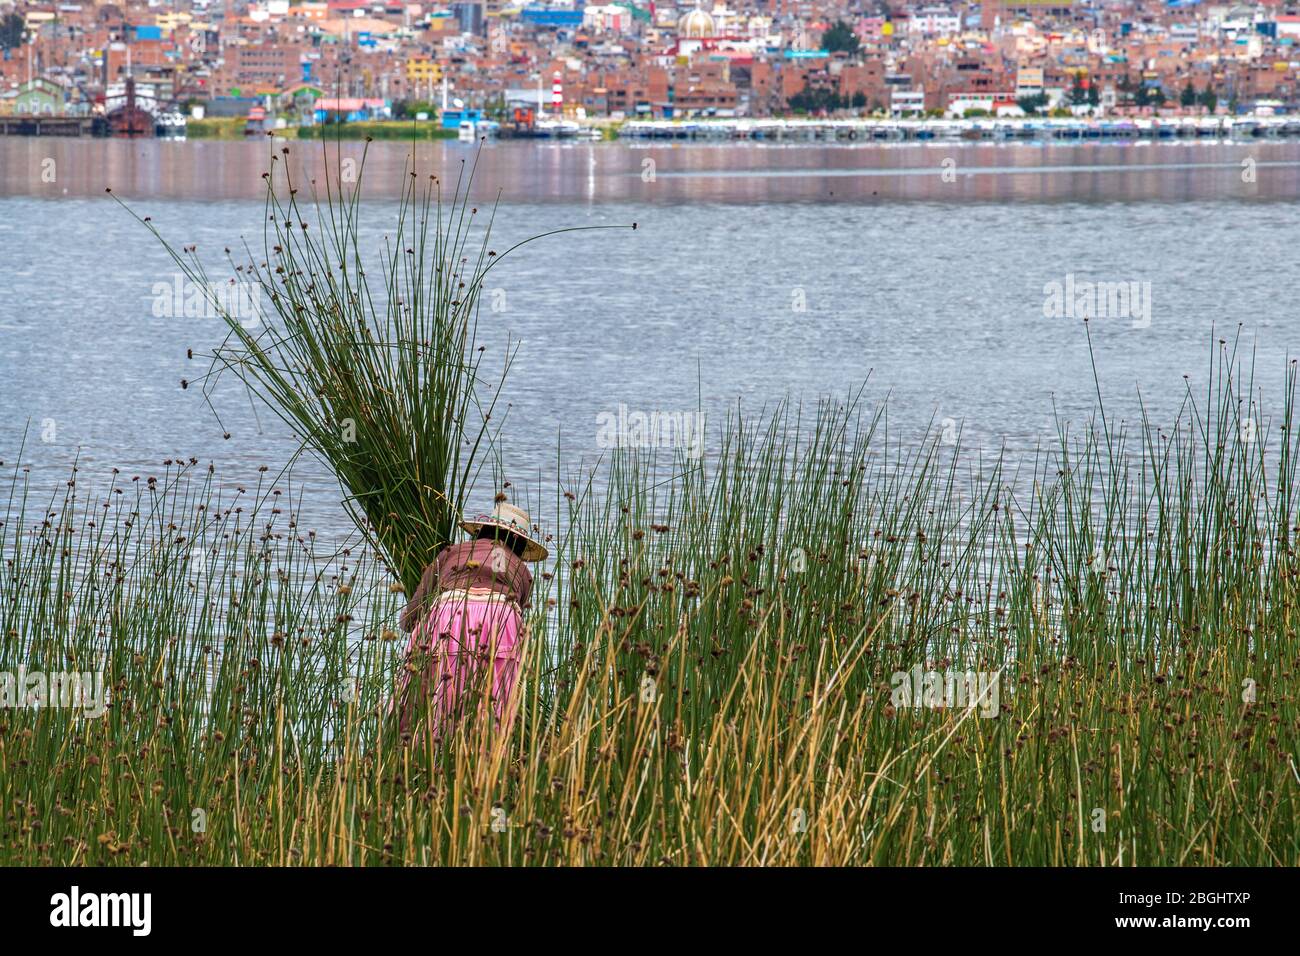 Indigenous women collecting reeds at the edge of Lake Titicaca, Puno, southern Peru Stock Photo